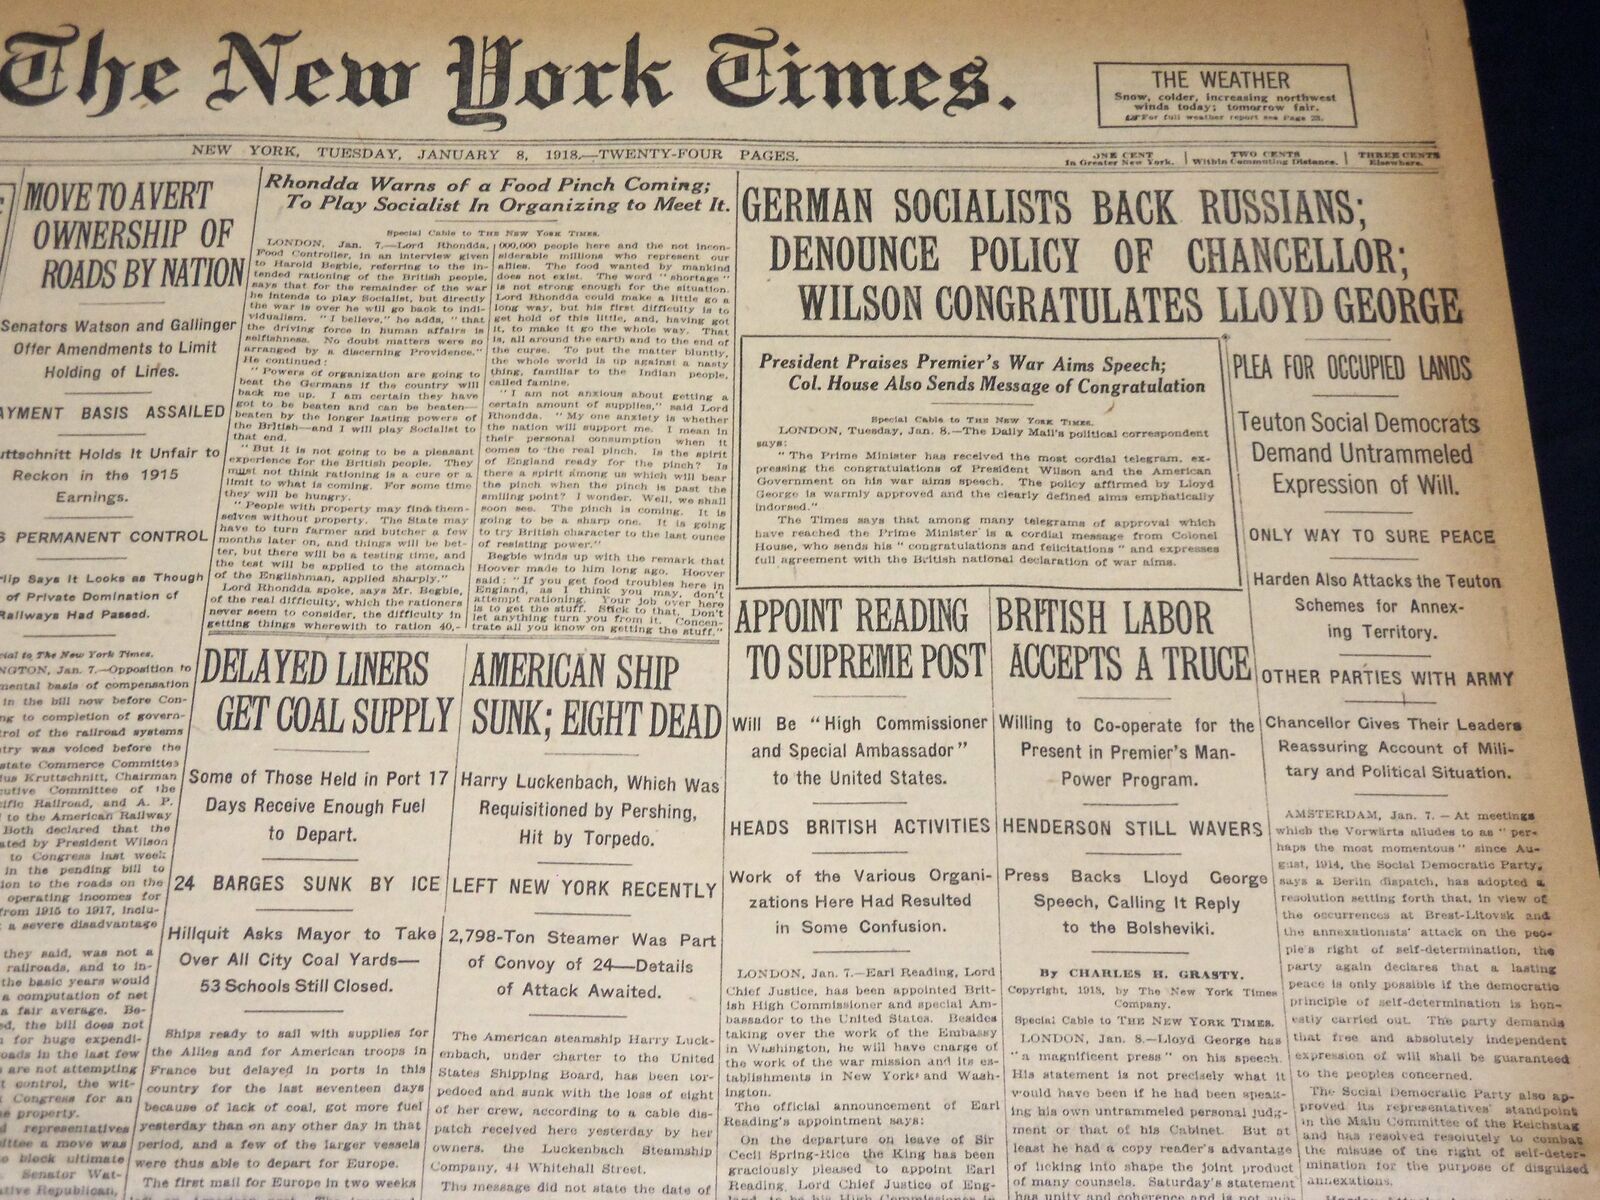 1918 JANUARY 8 NEW YORK TIMES - GERMAN SOCIALISTS BACK RUSSIANS - NT 7917